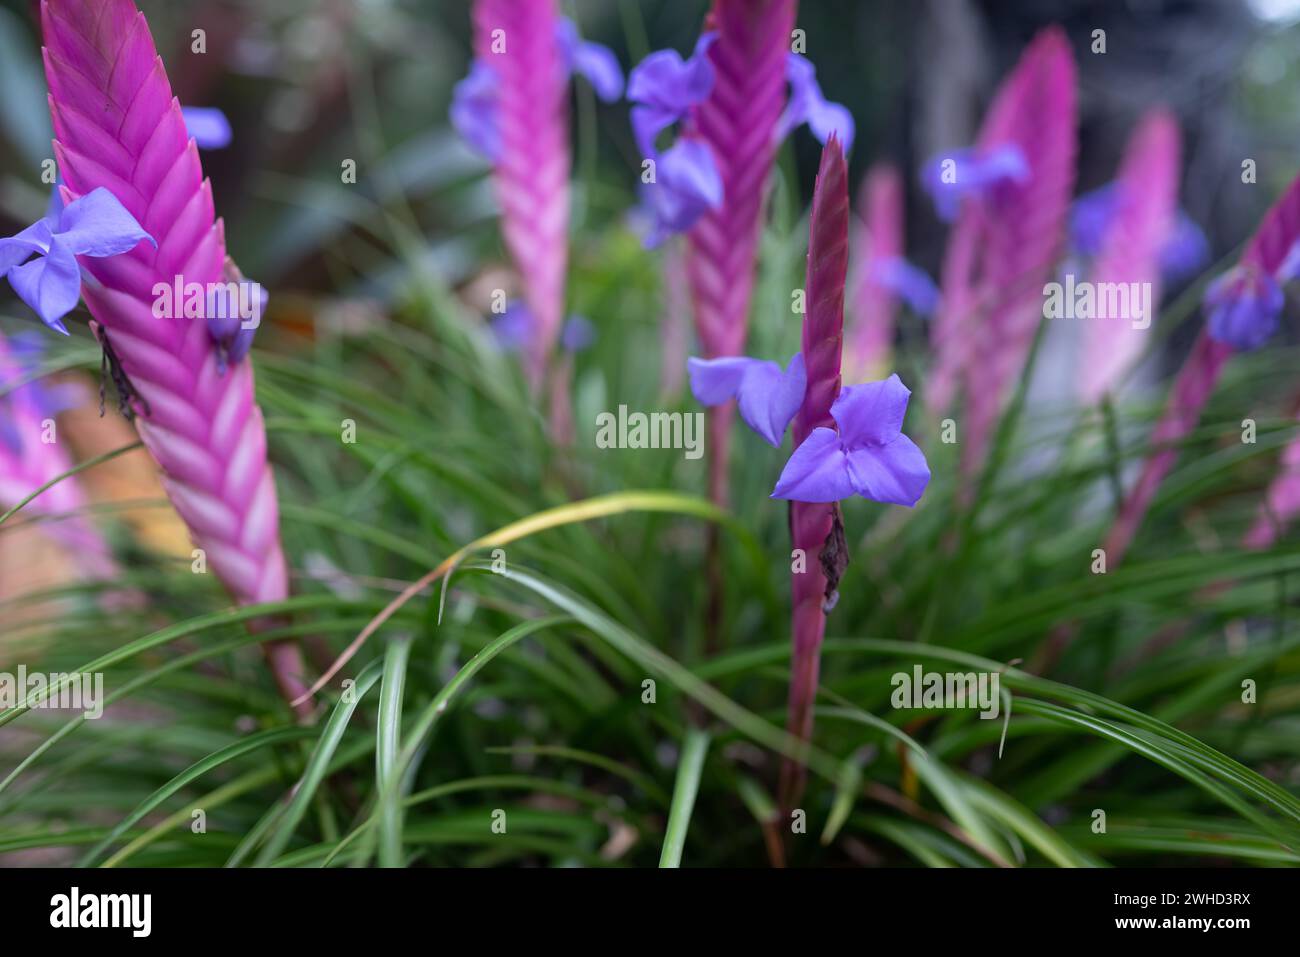 Pink, lilac and blue flowers closeup. Pink quill or tillandsia guatemalensis Stock Photo